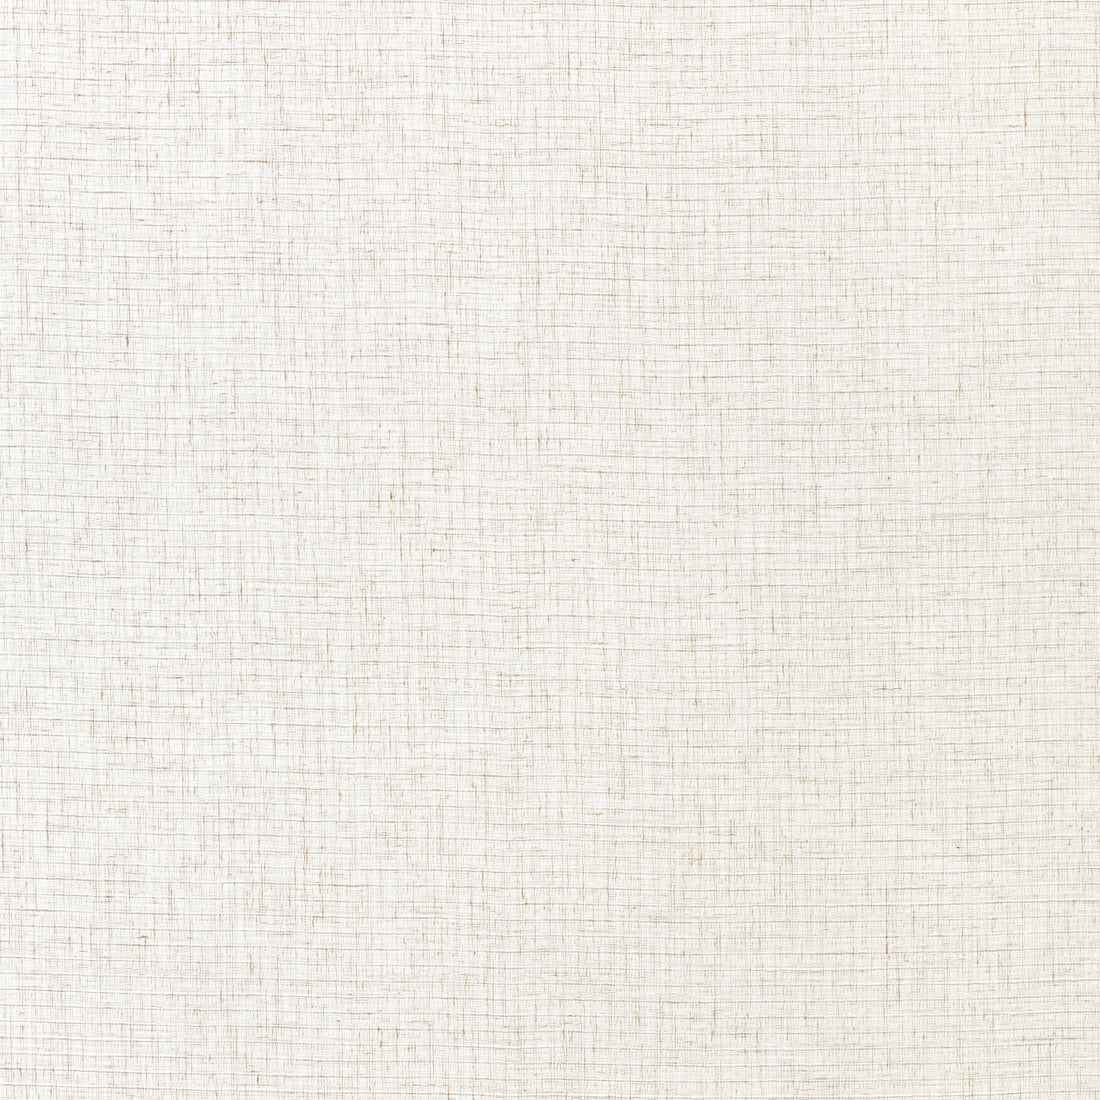 Wembley fabric in natural color - pattern number FWW7115 - by Thibaut in the Atmosphere collection